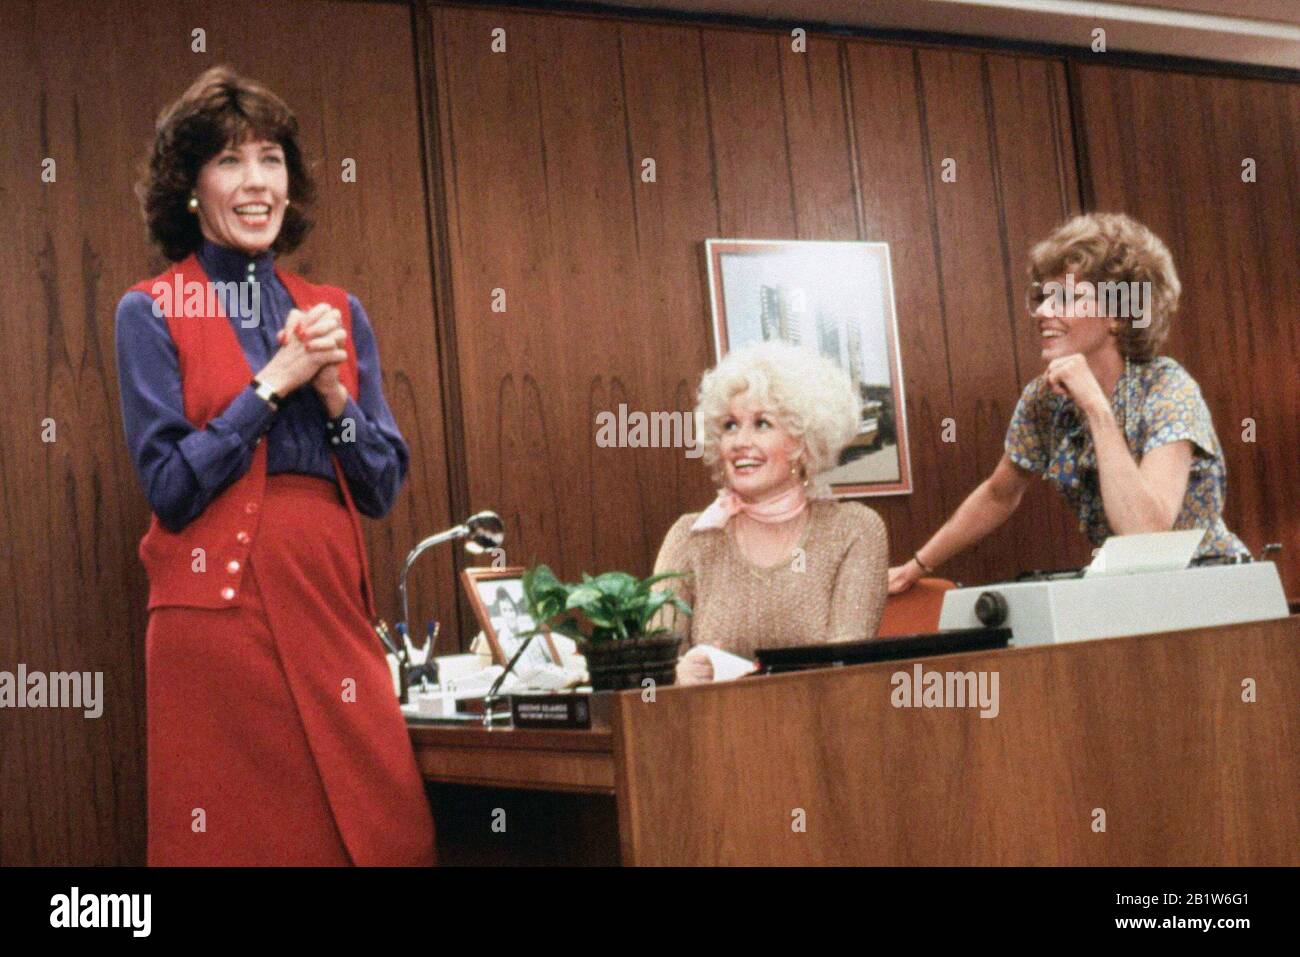 Jane Fonda, Lily Tomlin, Dolly Parton, '9 to 5' (1980) (aka Nine to Five) Photo Credit: 20th Century Fox / The Hollywood Archive  File Reference # 33962-237THA Stock Photo